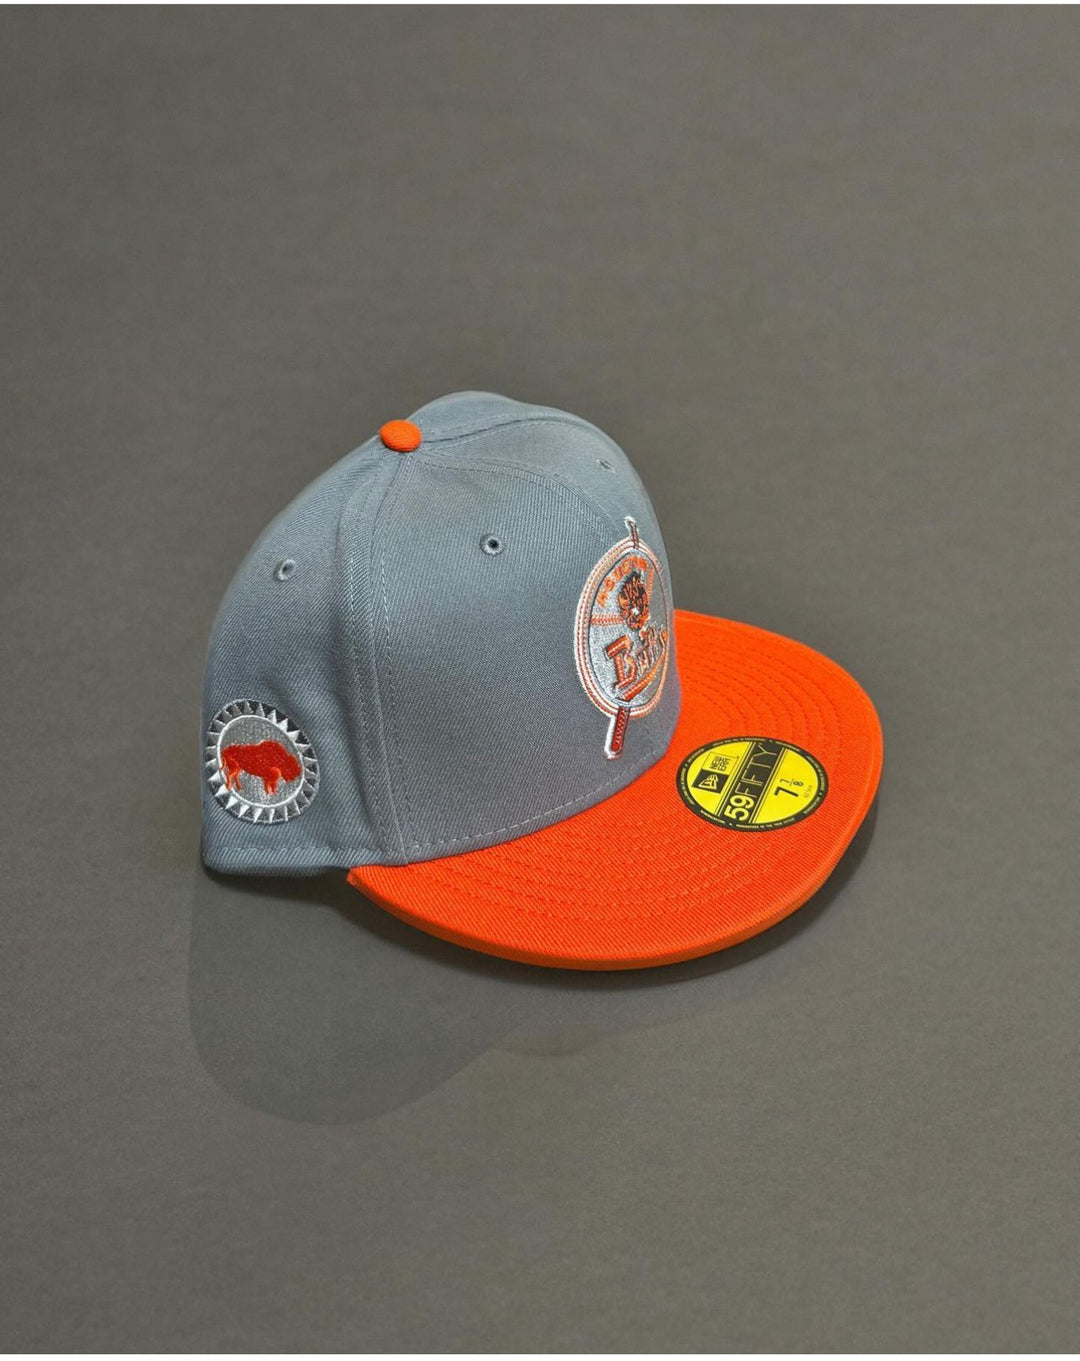 Houston Buffs 59FIFTY Fitted Cap - Gray/Orange